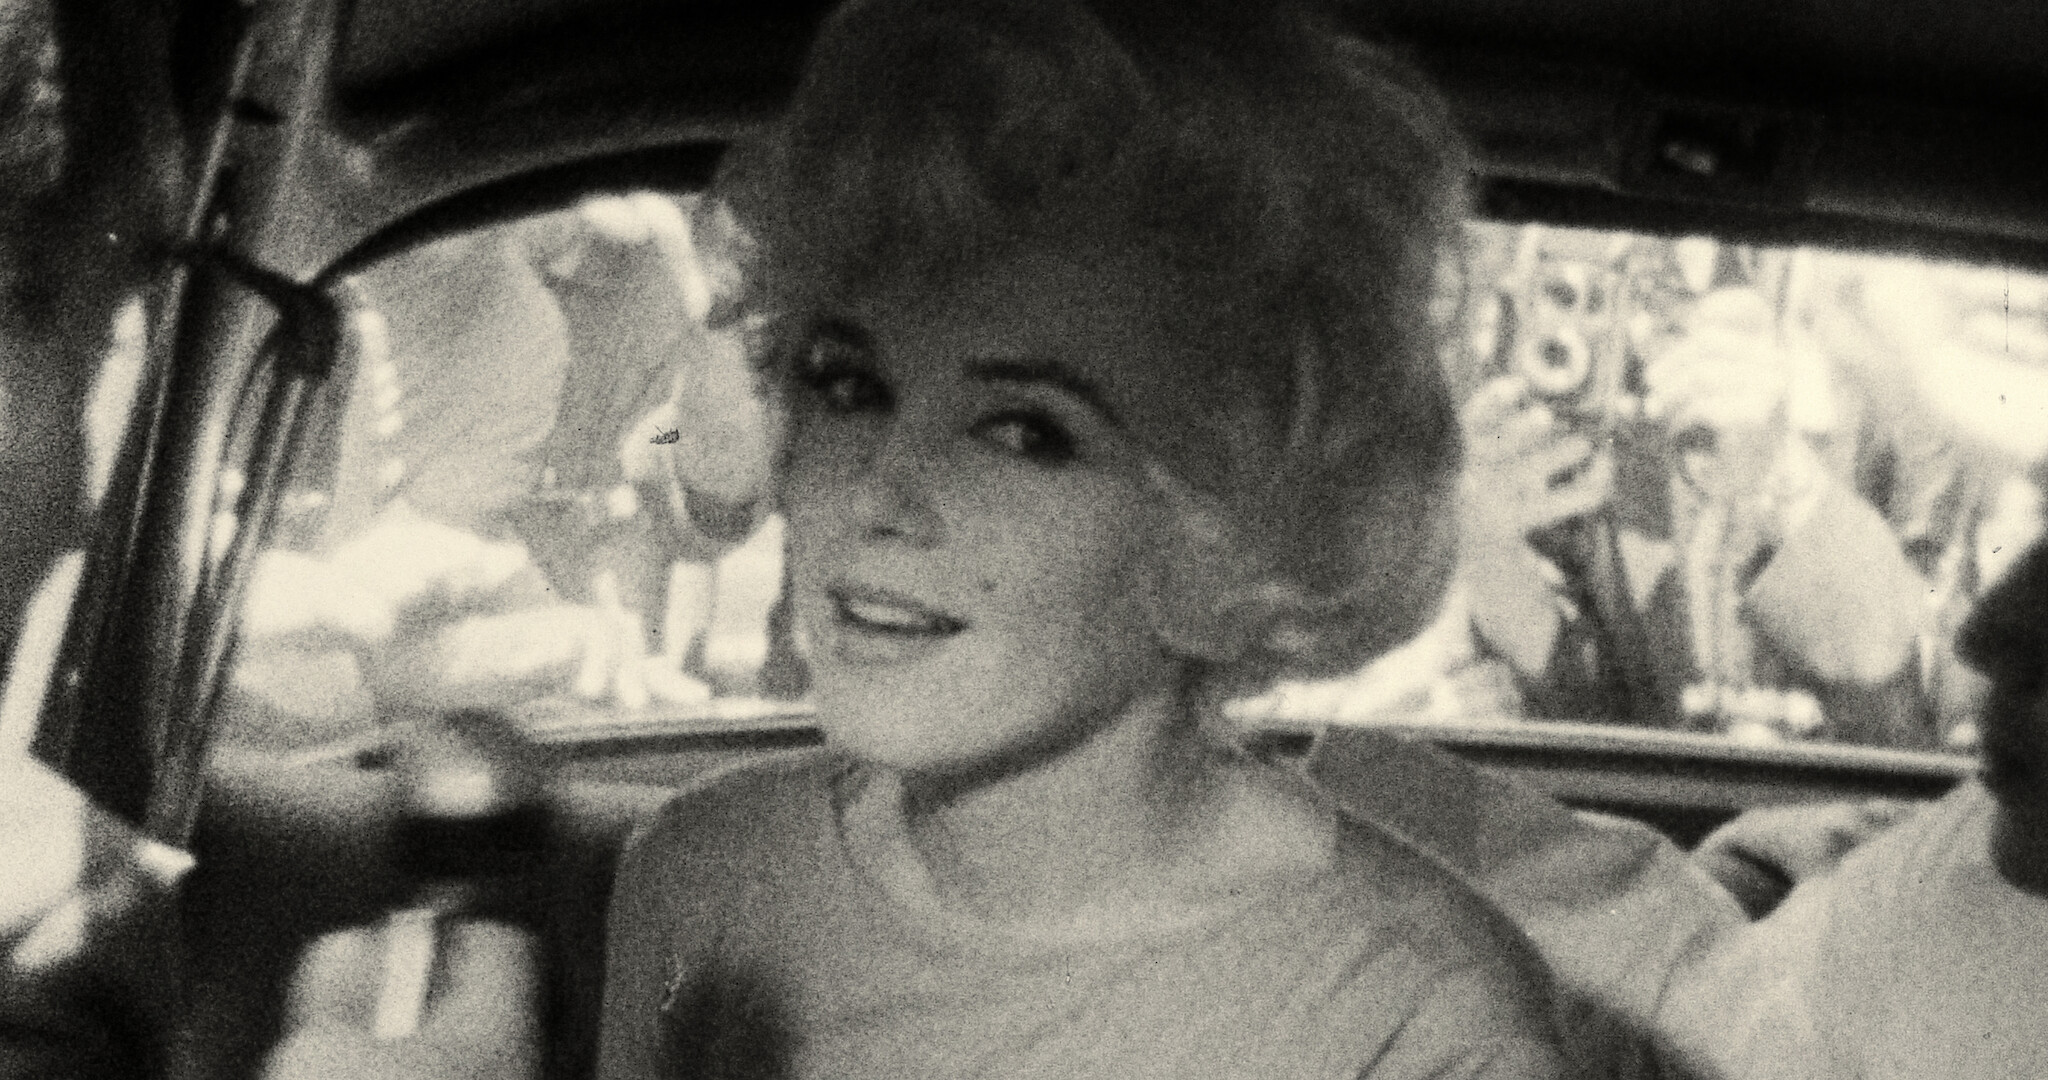 Death Of An Icon – Marilyn Monroe (Episode 3)